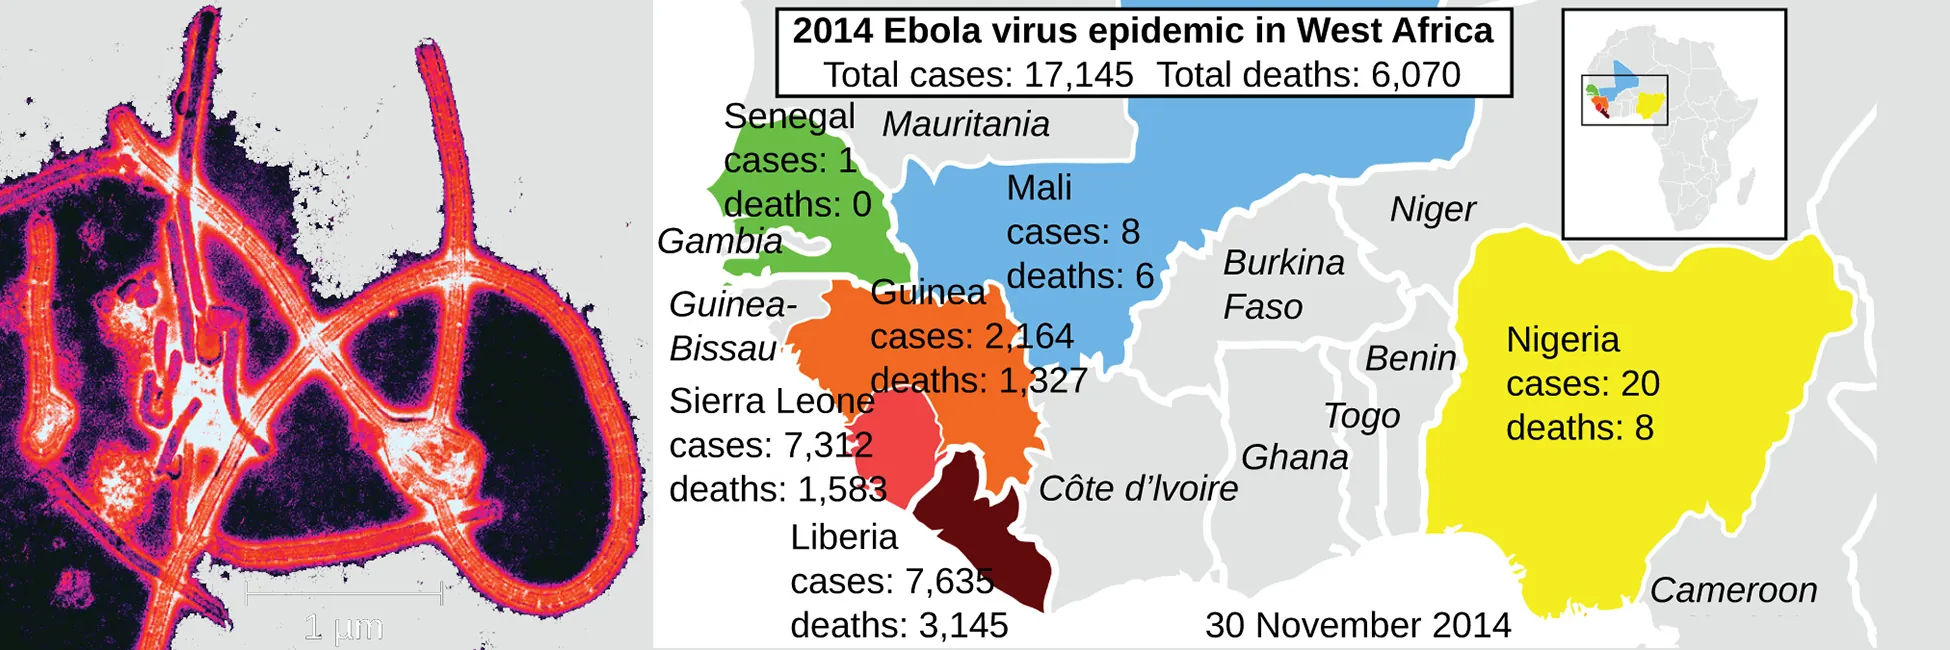 The electron micrograph shows linear viruses wrapped into a delta-shaped structure. The map shows 2014 Ebola epidemics in West Africa. There were 17,124 total cases and 6.070 total deaths. Senegal had 1 case and no deaths. Mali had 8 cases and 6 deaths. Guinea had 2, 164 cases and 11,326 deaths, Sierra Leone had 7,312 cases and 1,583 deaths, Liberia had 7,635 cases and 3,145 deaths. Nigeria had 20 cases and 8 deaths.